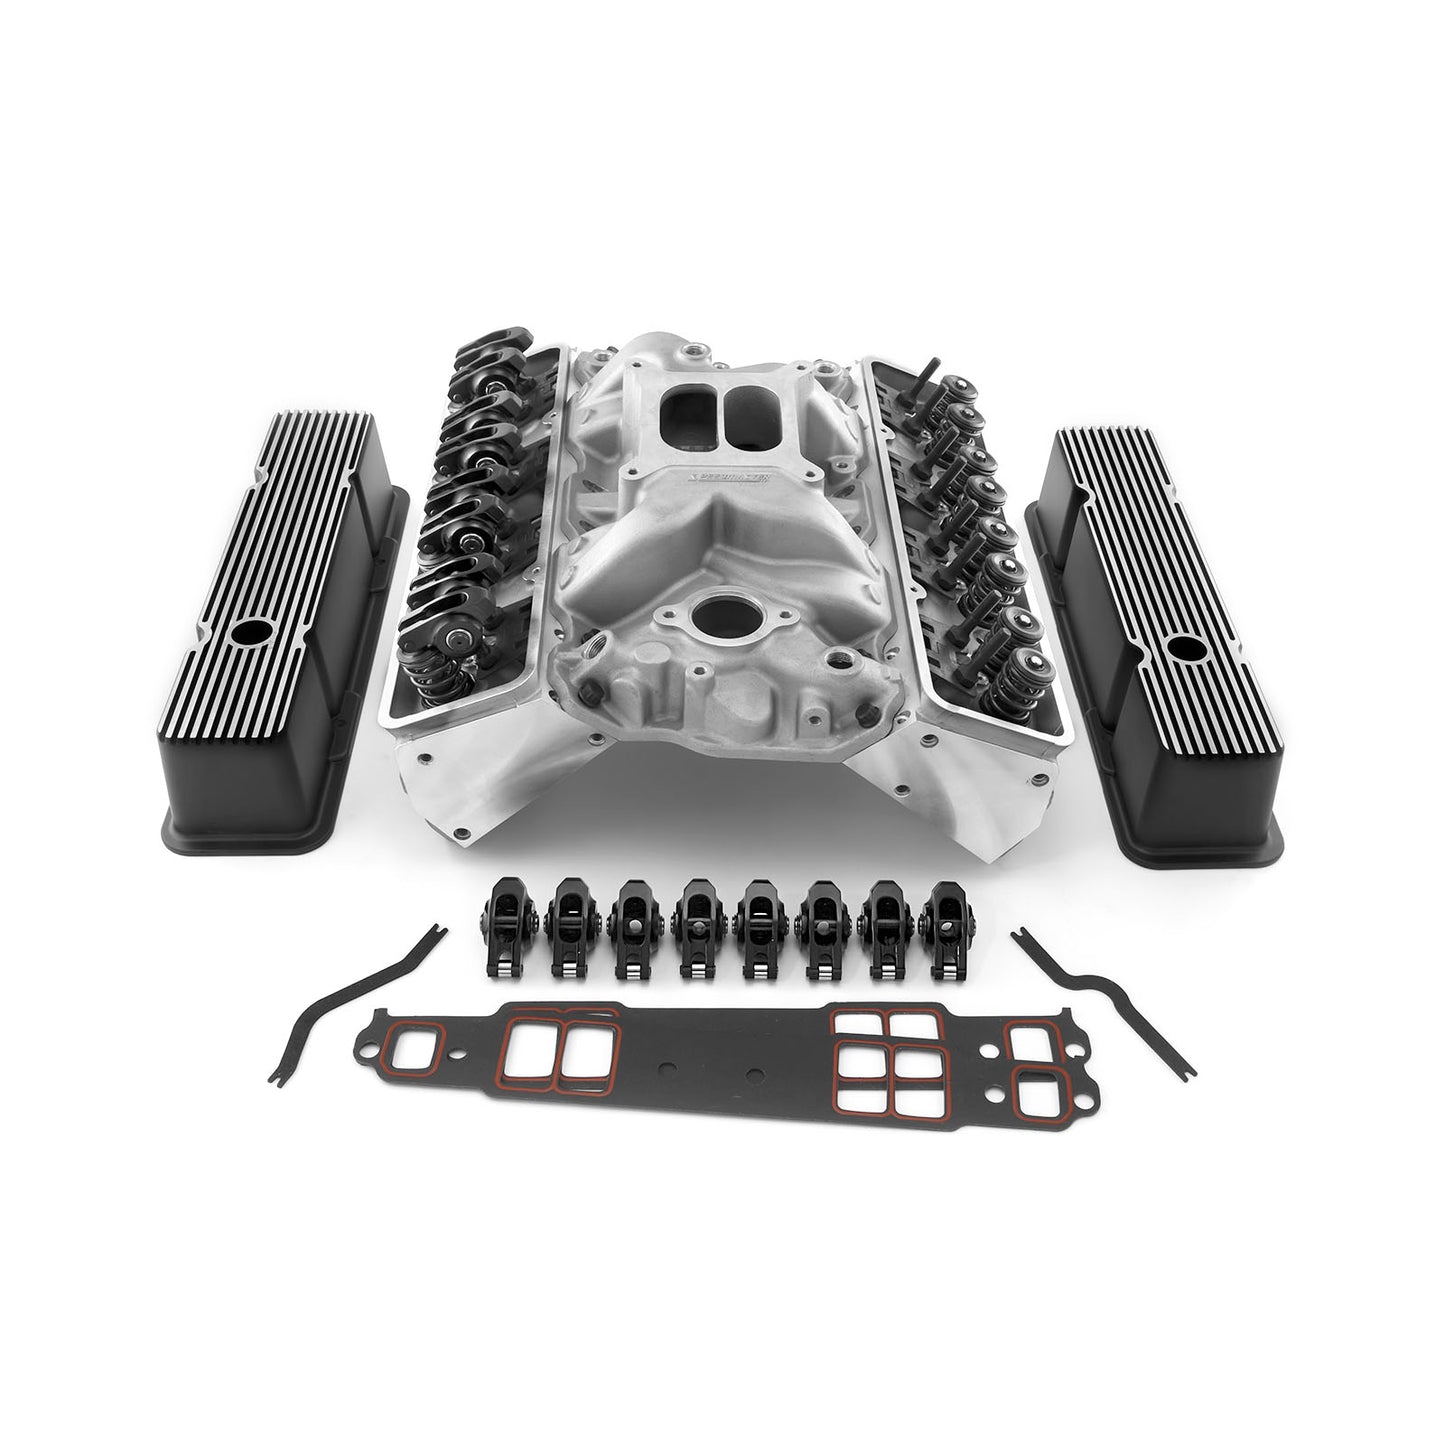 Speedmaster 1-435-002 Fits Chevy SBC 350 Angle Cylinder Head Top End Engine Combo Kit [Solid/Mechanical Flat Tappet]